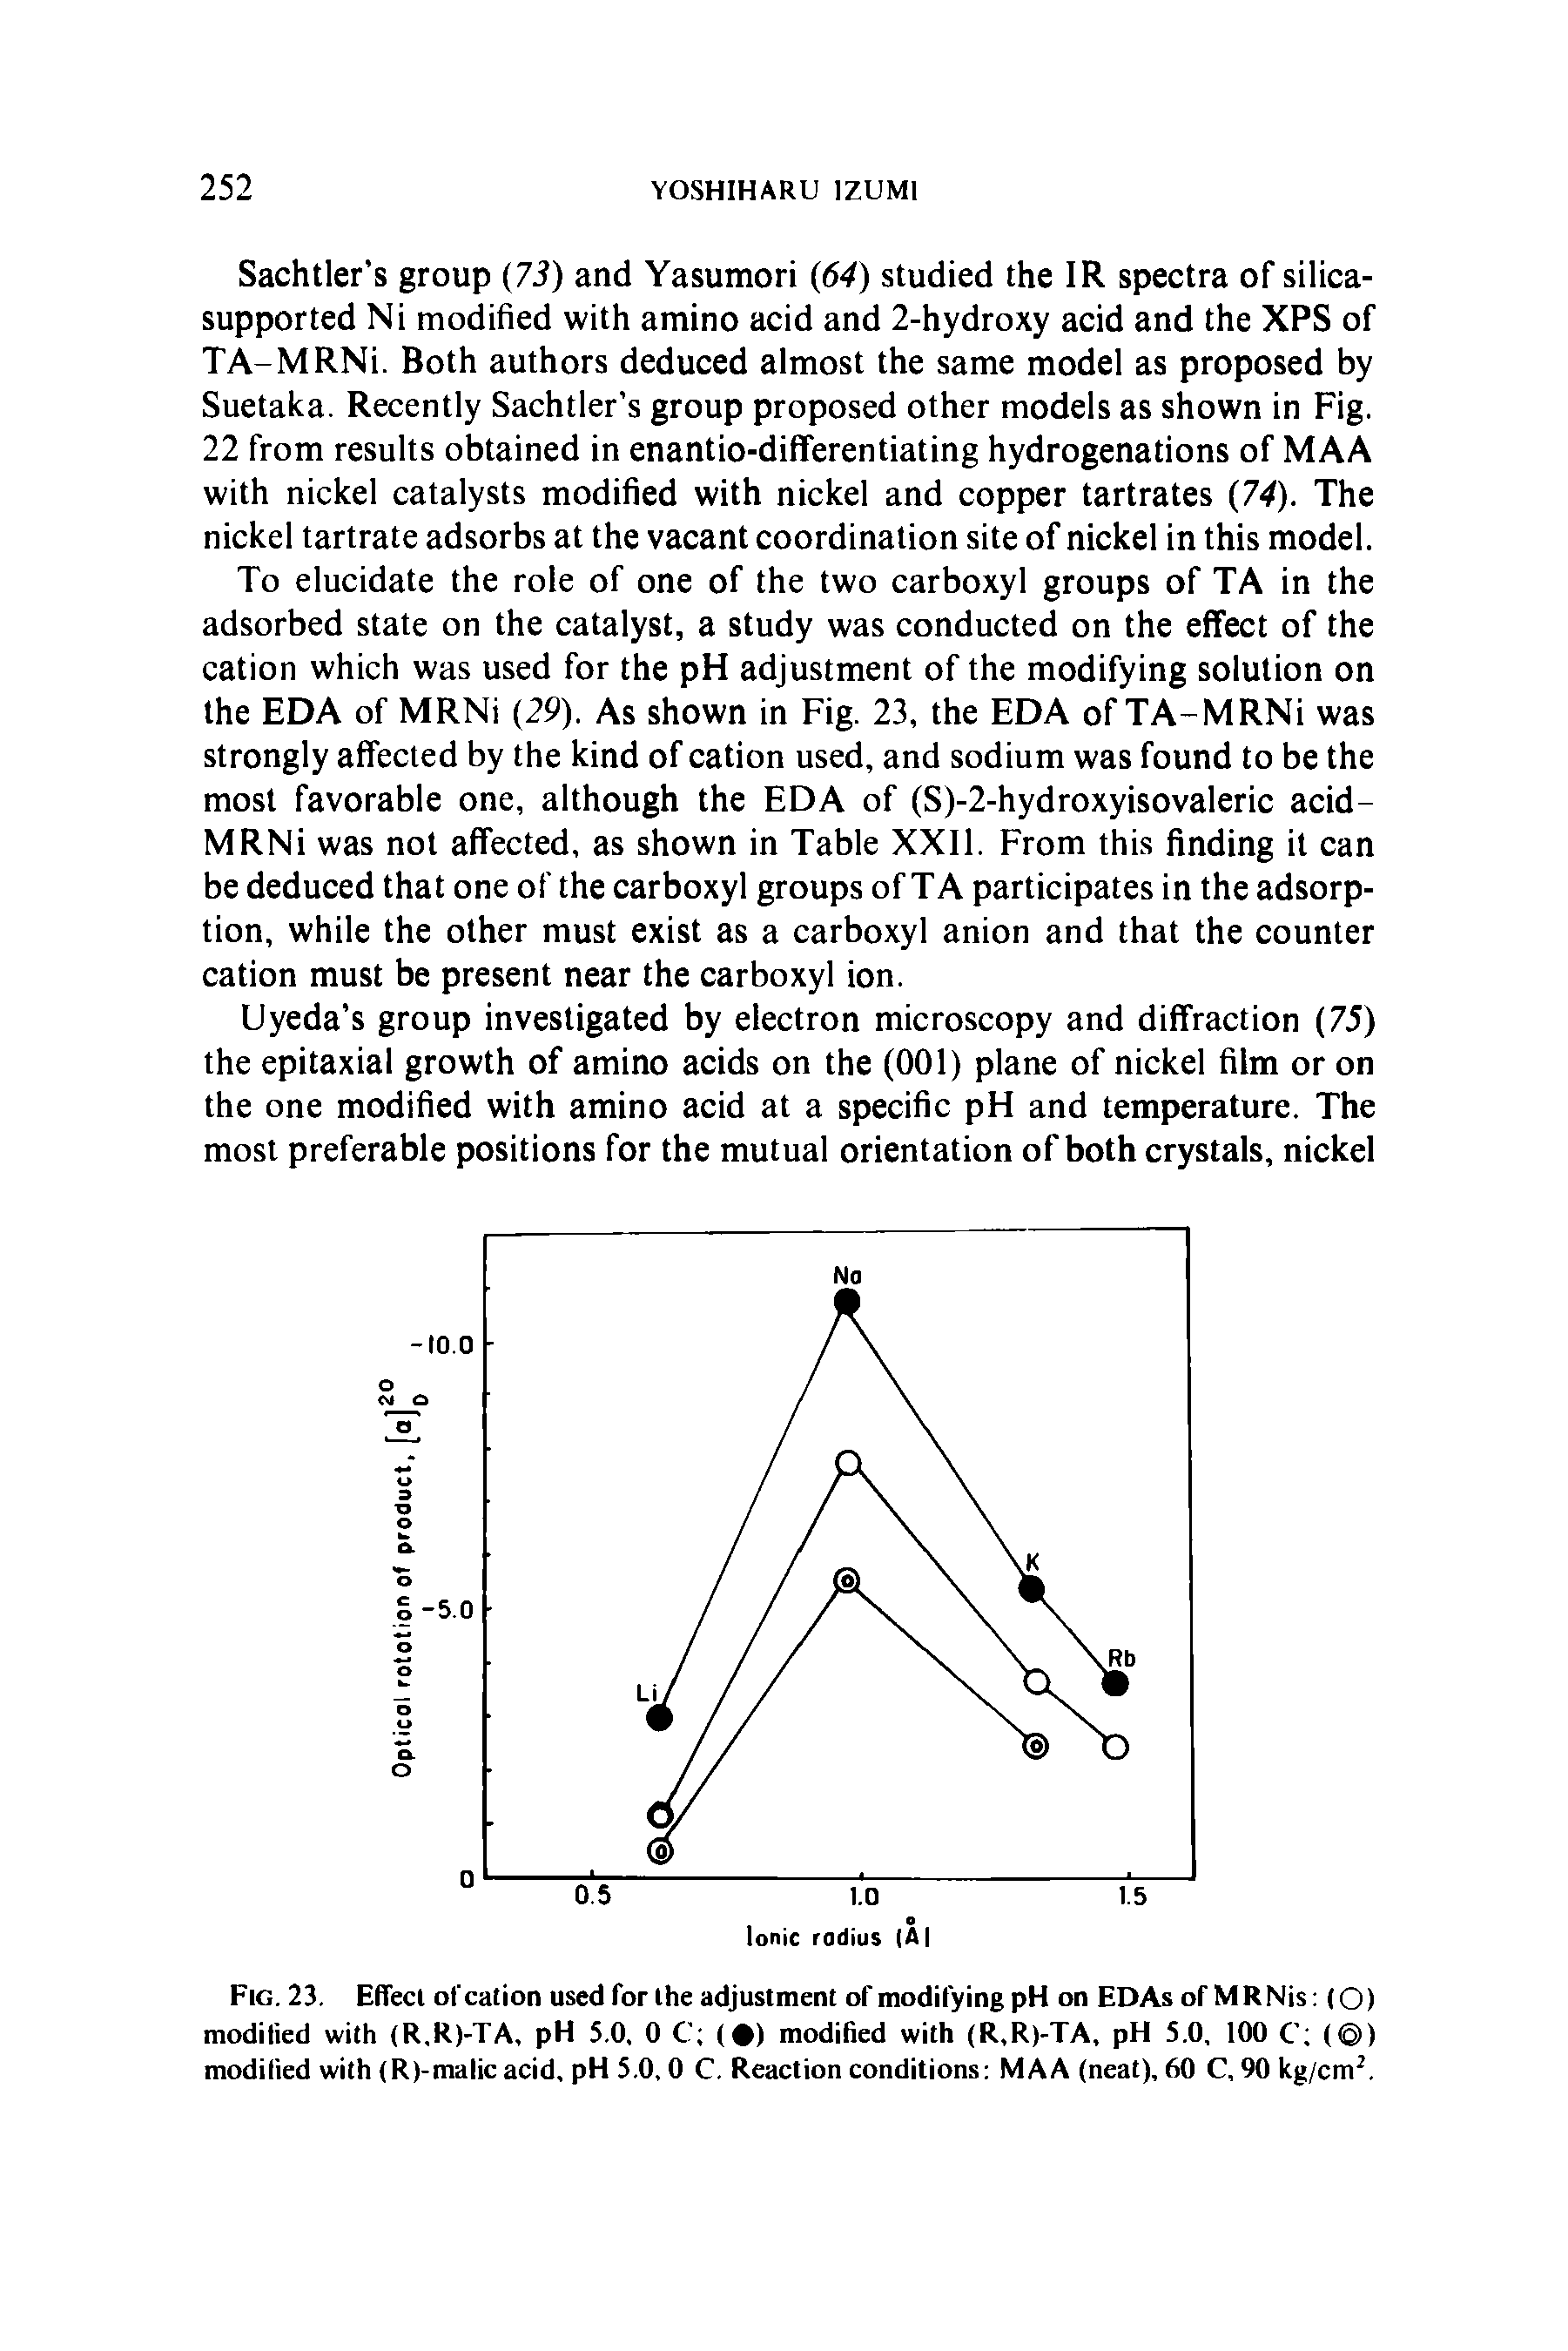 Fig. 23. Effect of cation used for the adjustment of modifying pH on EDAs of MRNis (O) modified with (R.R)-TA, pH 5.0, 0 C ( ) modified with (R,R)-TA, pH 5.0, 100 C ( ) modified with (R)-malic acid, pH 5.0,0 C. Reaction conditions MAA (neat), 60 C, 90 kg/cm2.